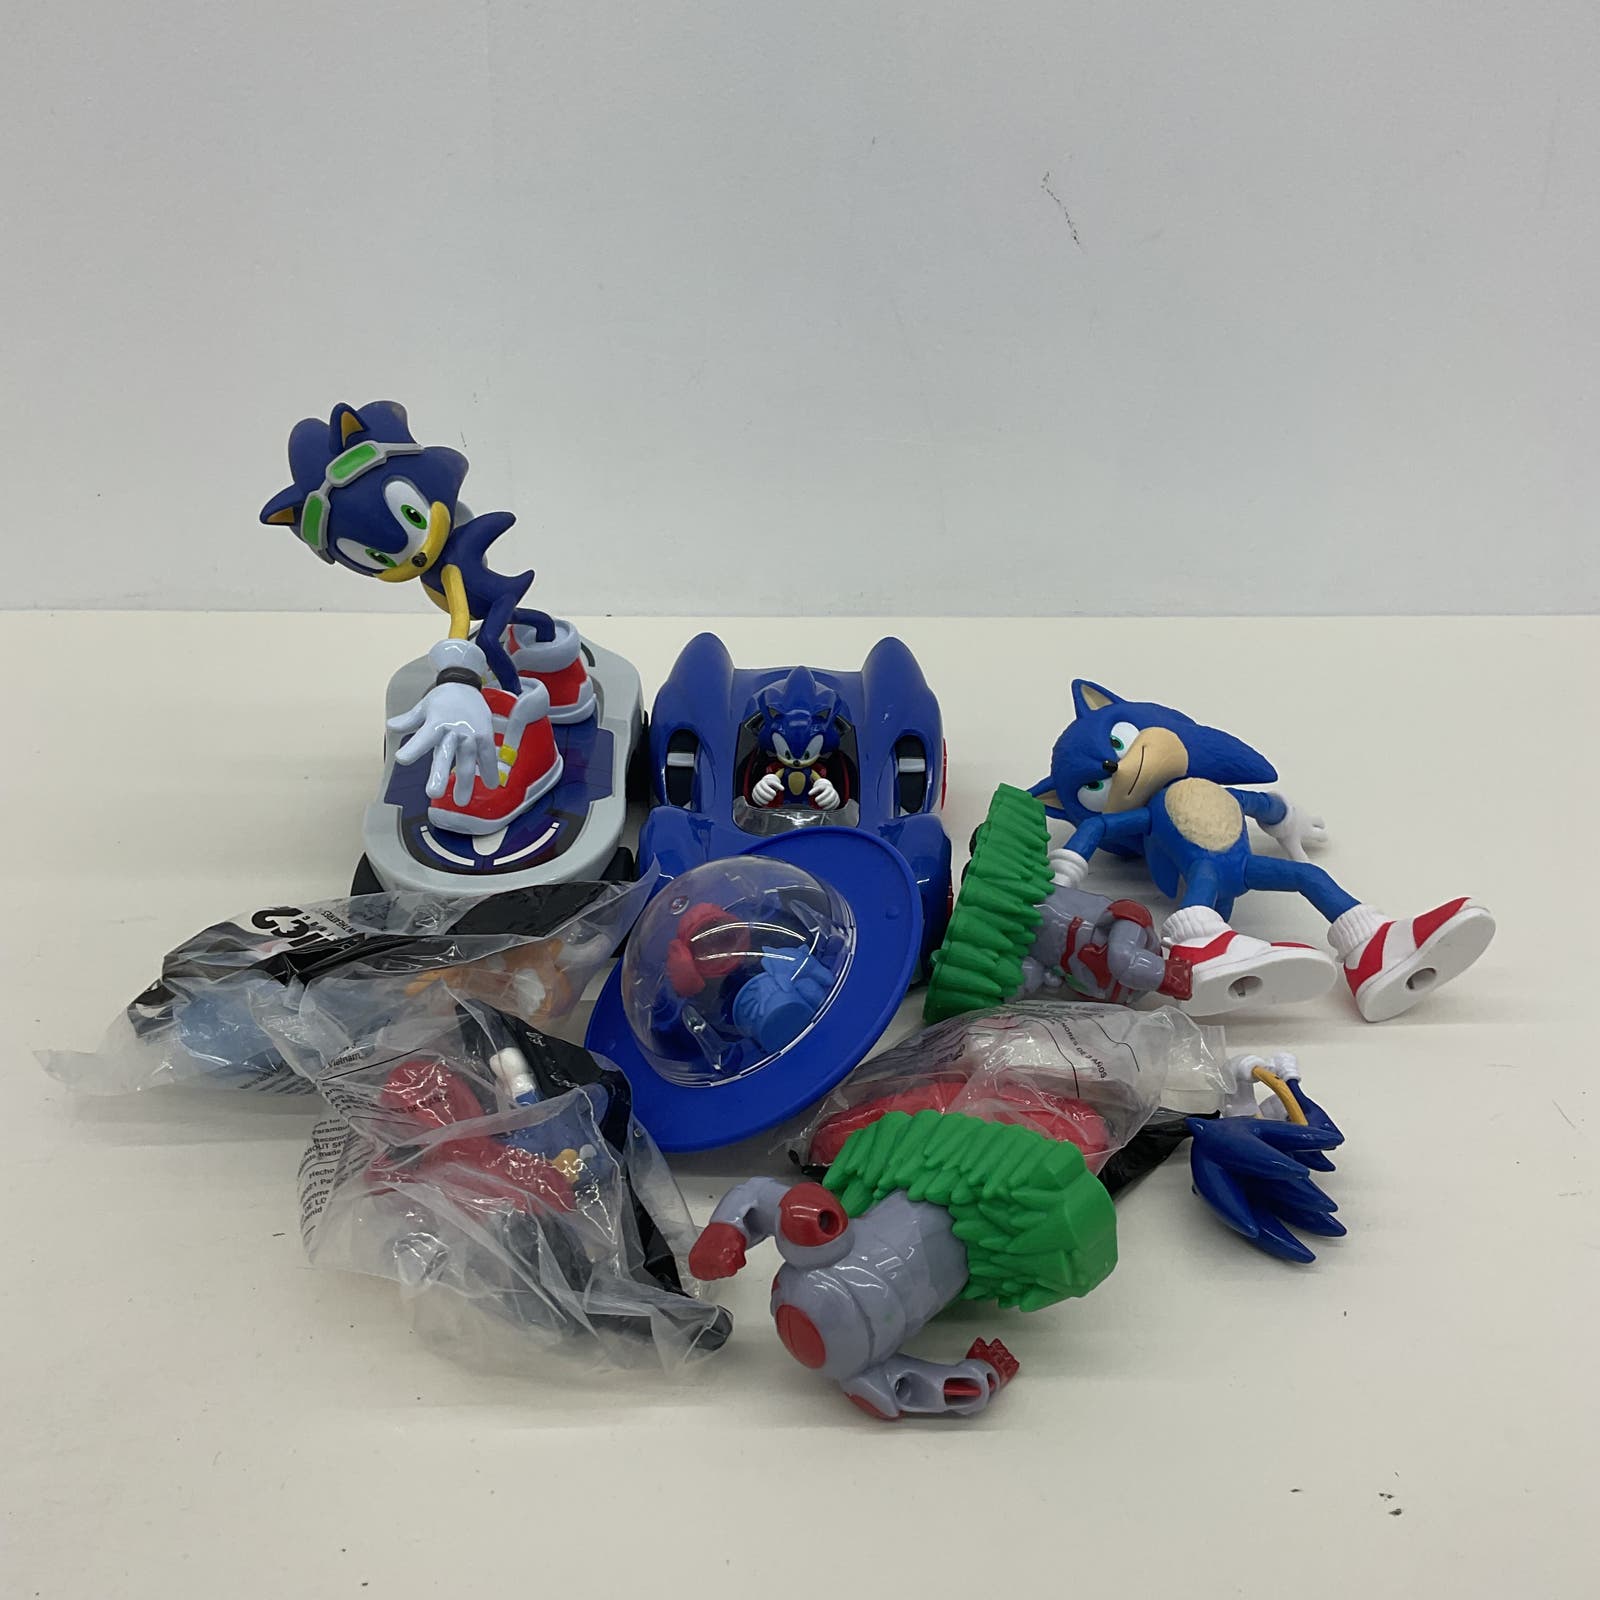 Preowned SEGA Sonic the Hedgehog Happy Meal Toy Action Figures Loose Used - Warehouse Toys